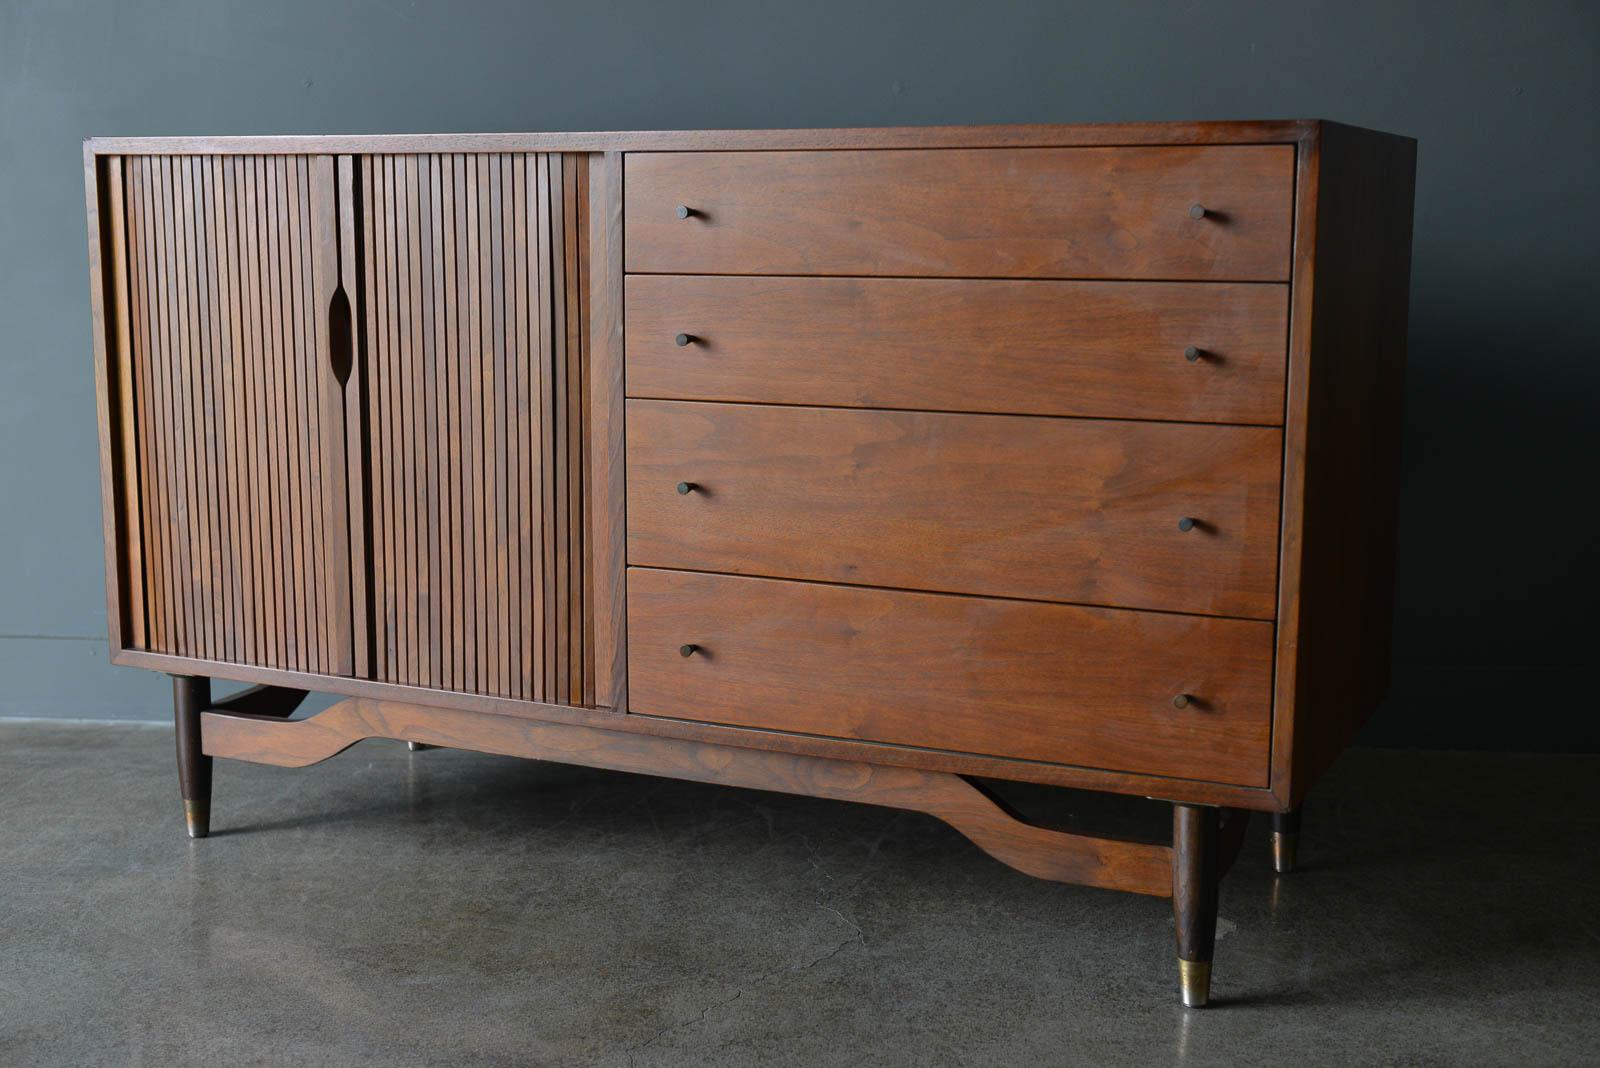 Walnut Tambour door credenza by Barzilay, ca. 1965. Beautiful walnut grain with tambour doors on the left with two originally painted white adjustable sliding drawers and 5 drawers on the right for added storage. Original drawer hardware is